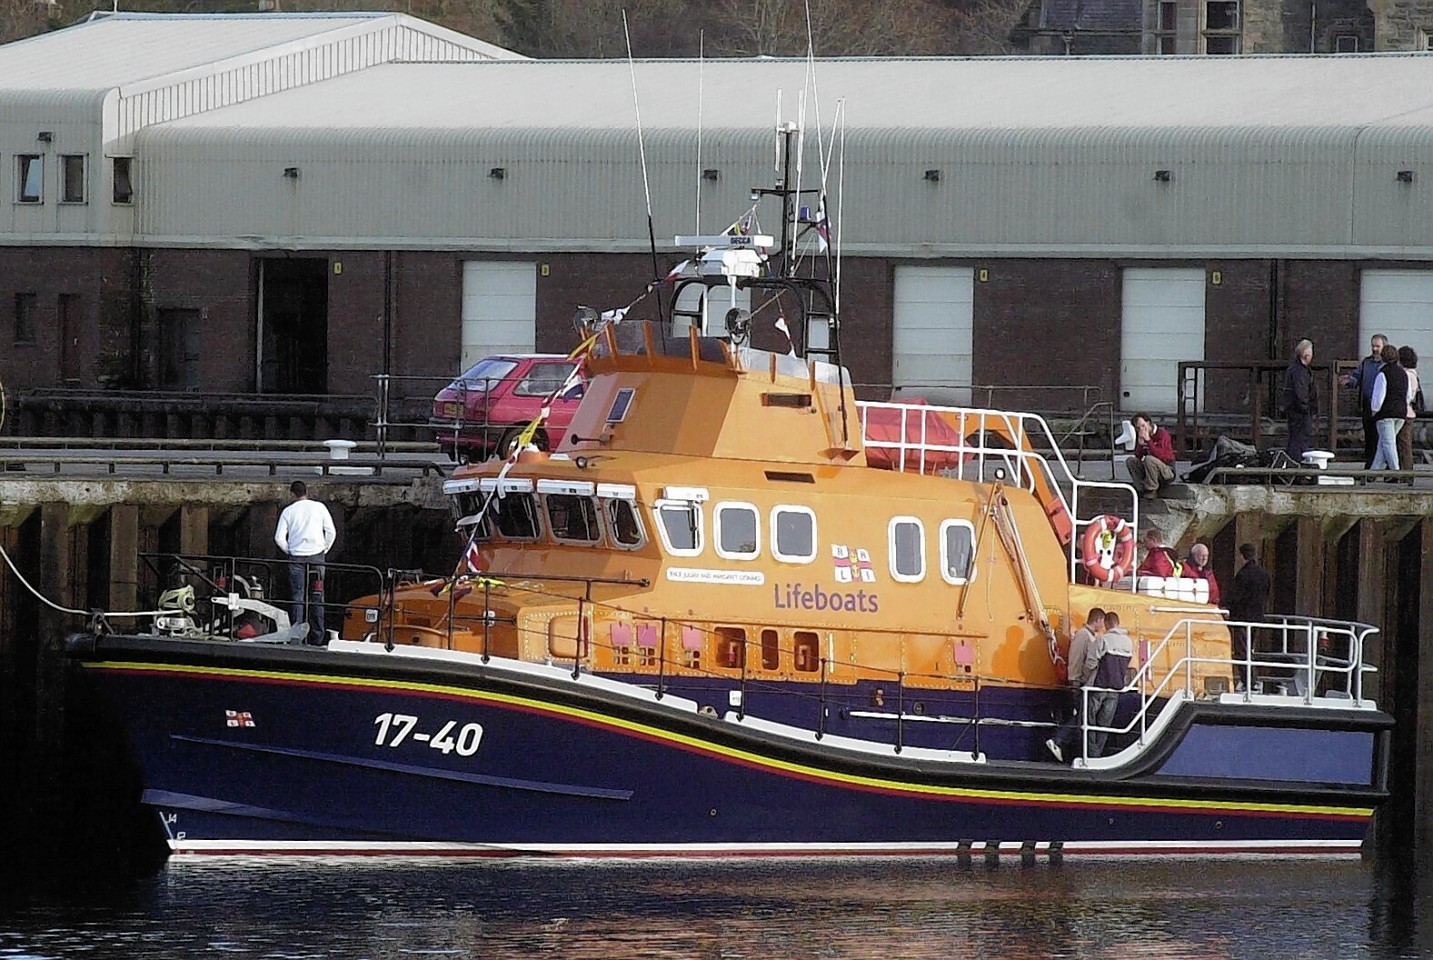 The Lochinver Lifeboat